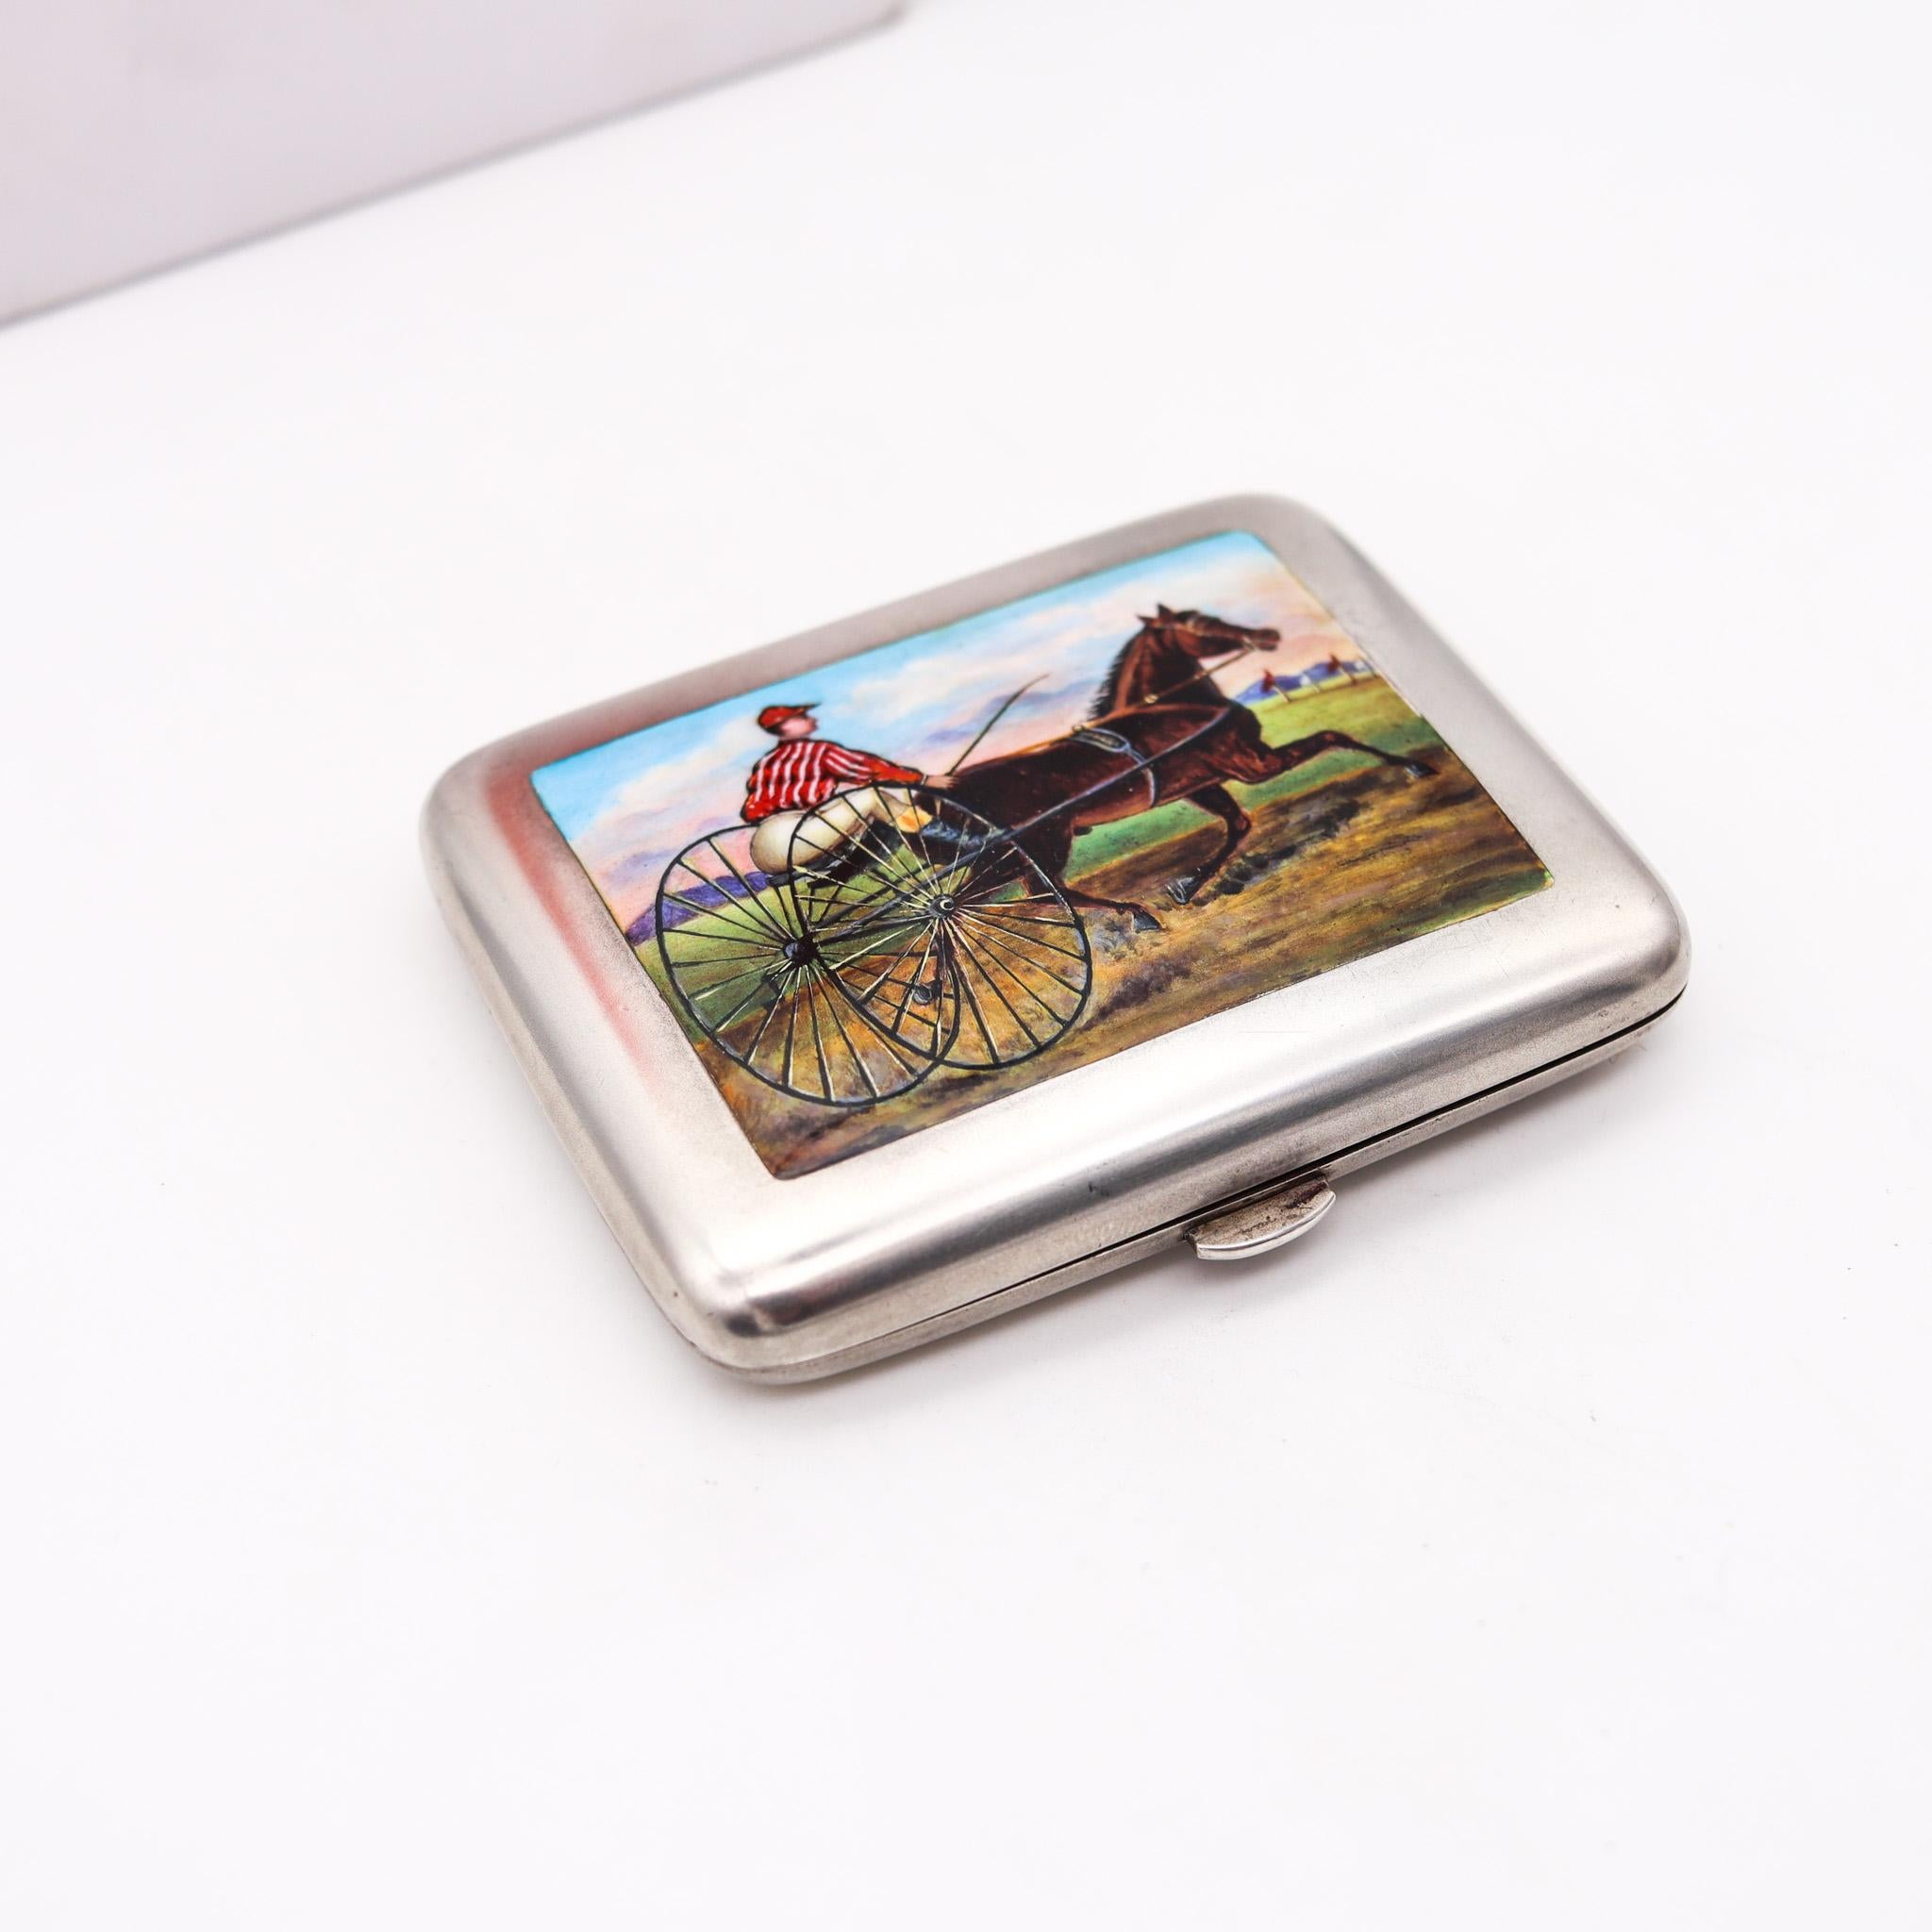 Enamelled German cigarette case.

Great historical piece, created in Germany during the turn of the century, back in the 1905. This beautiful cigarette box has been carefully crafted in the shape of a slightly cushioned rectangular form with